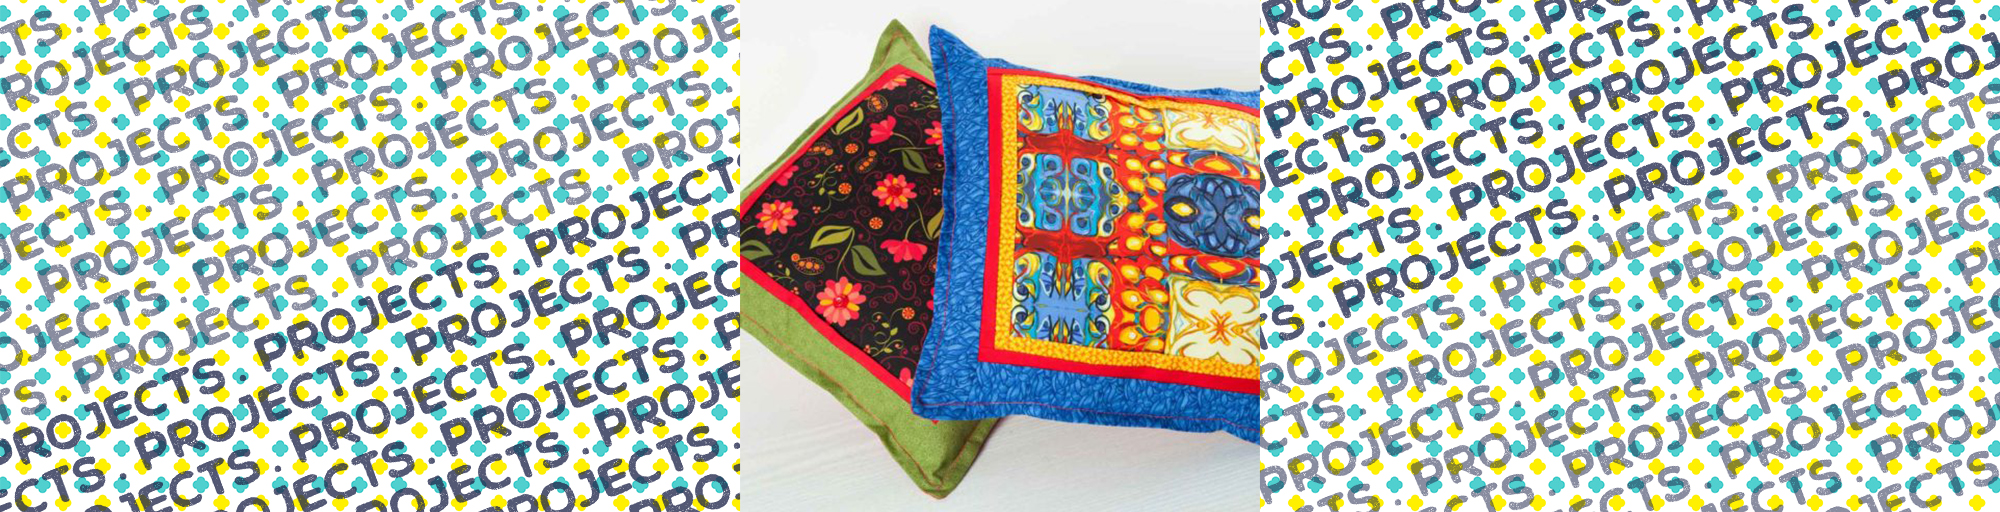 janome sewing project diy cushion